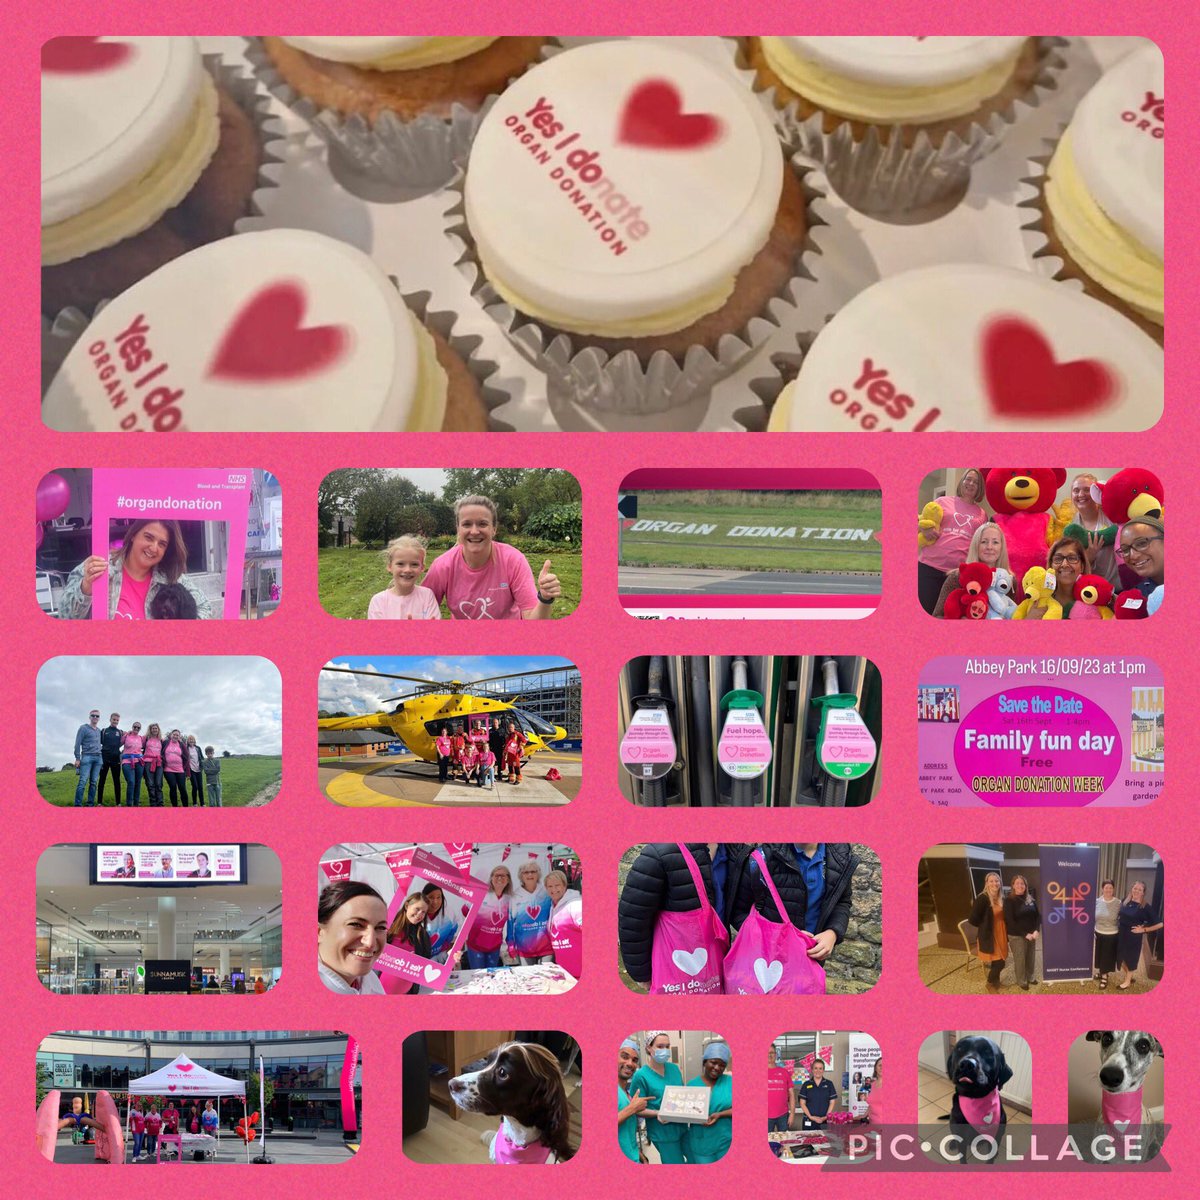 A brief snapshot of the activity over the Midlands during #OrganDonationWeek Our Specialist Nurses have worked tirelessly & with great ideas to spread the word in hospitals, events & communities. As well as logging many miles for #race4recipients plus maintaining the “day job” 💗